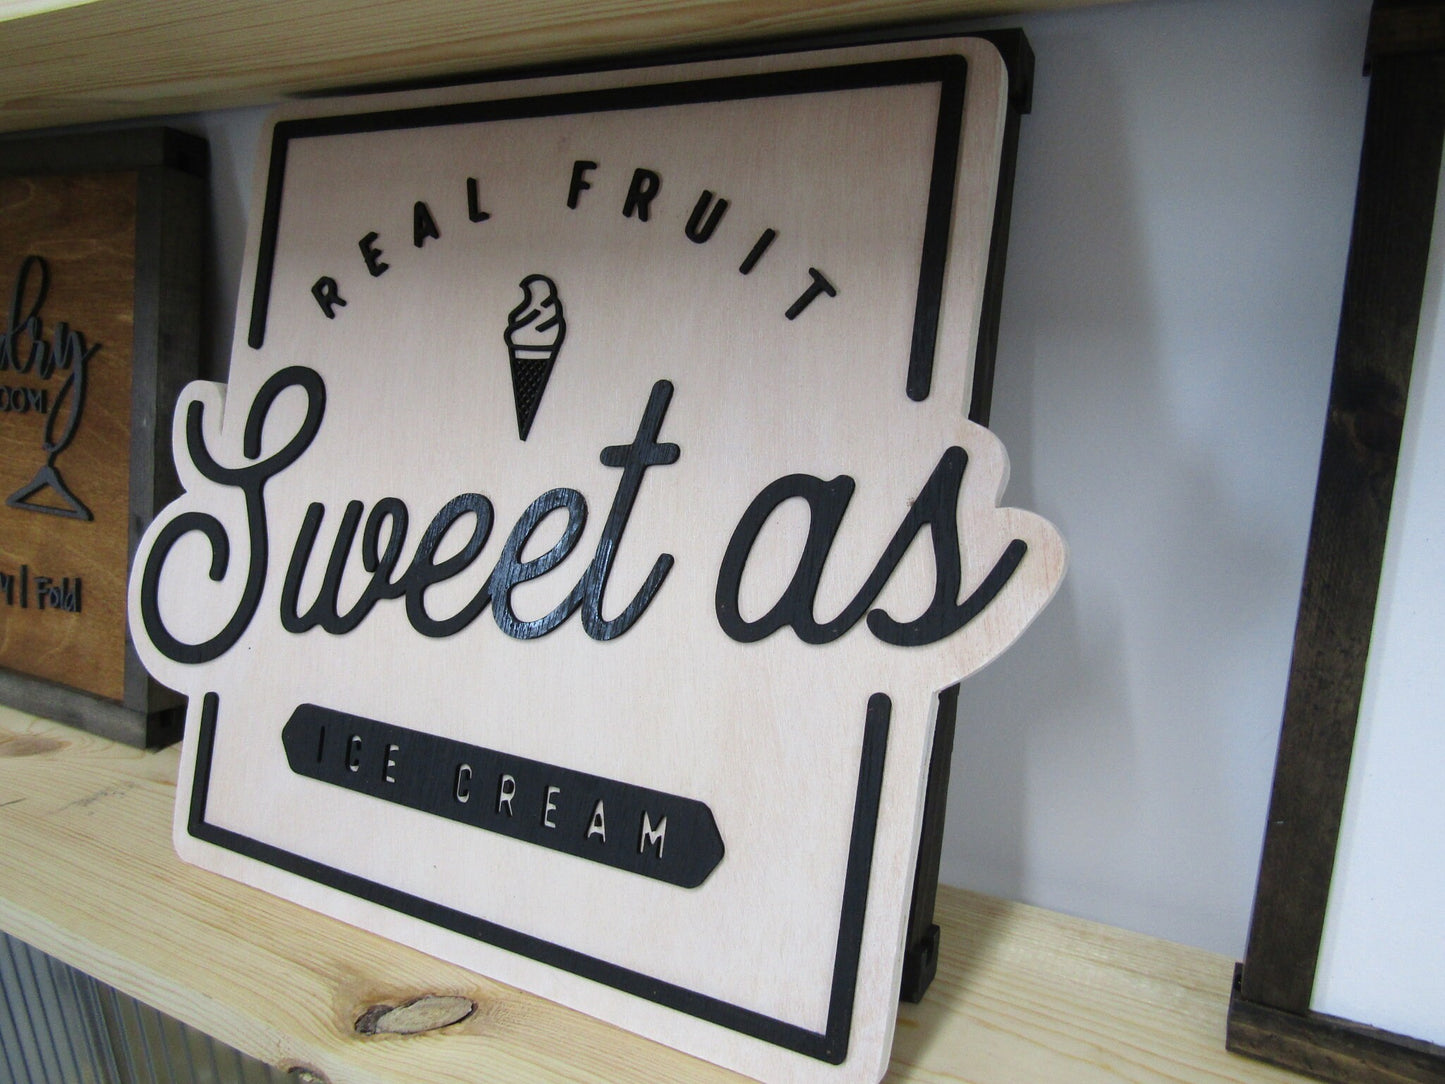 Custom Sign Square Business Commerical Signage Ice Cream Sweets Fruits 3D Made to Order Co Store Front Small Shop Logo Wooden Handmade